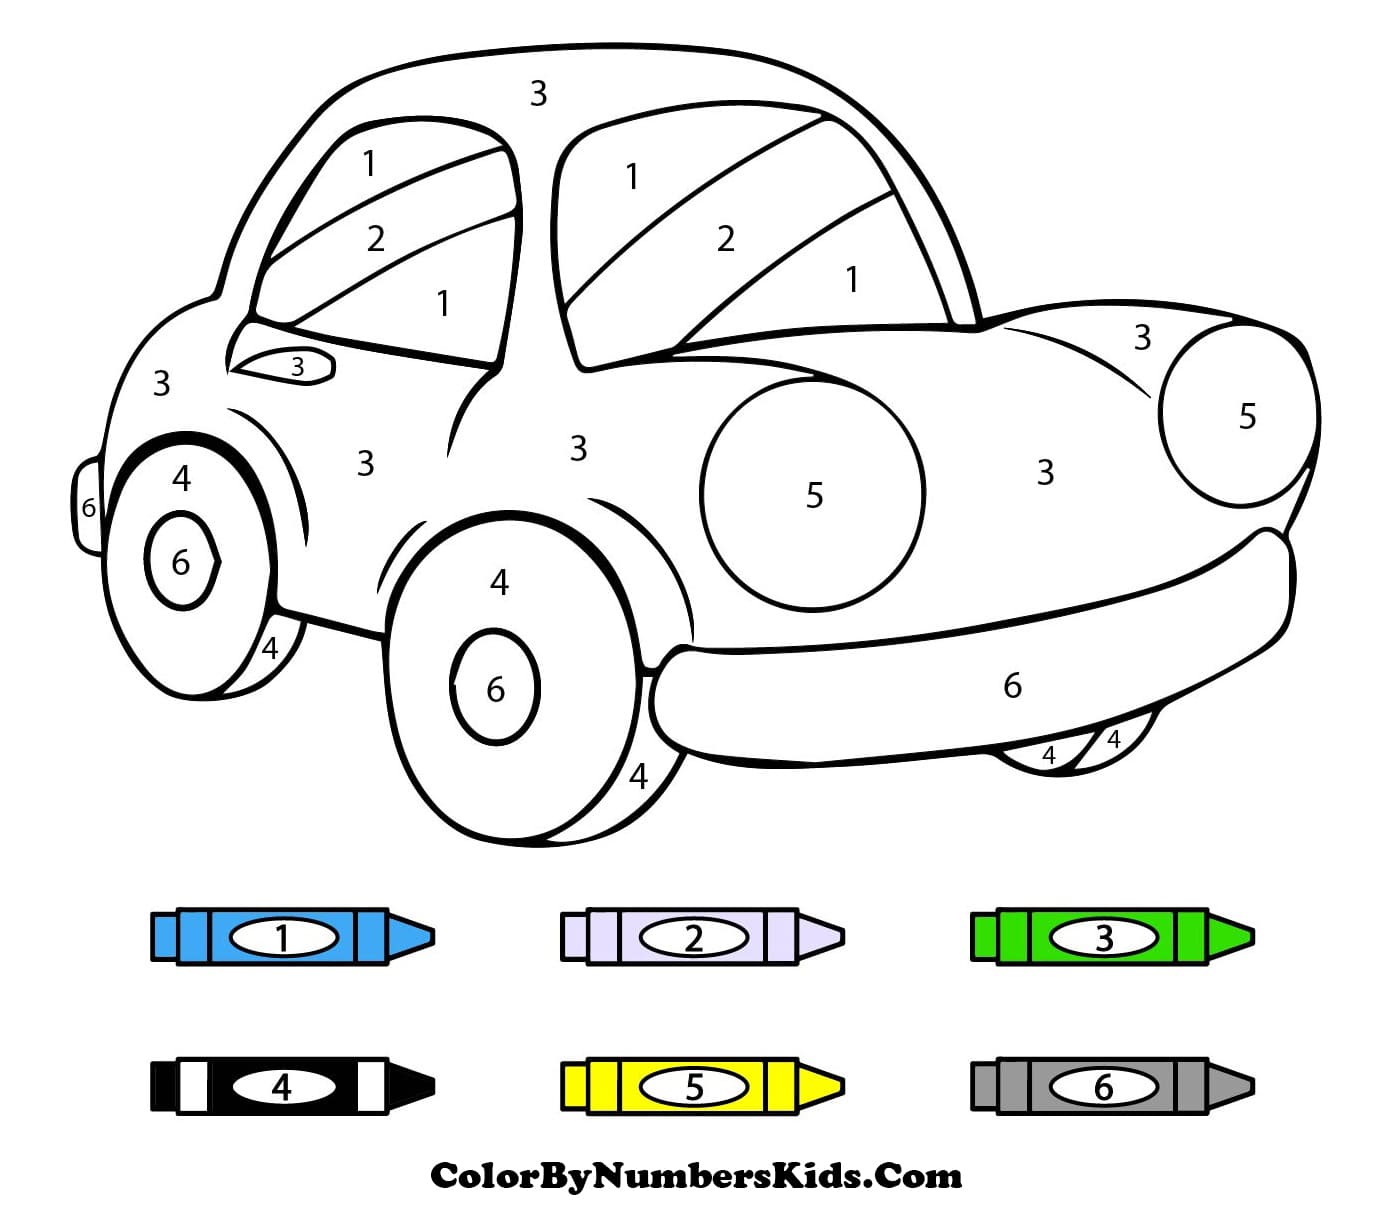 Car Color By Number - ColorByNumbersKids